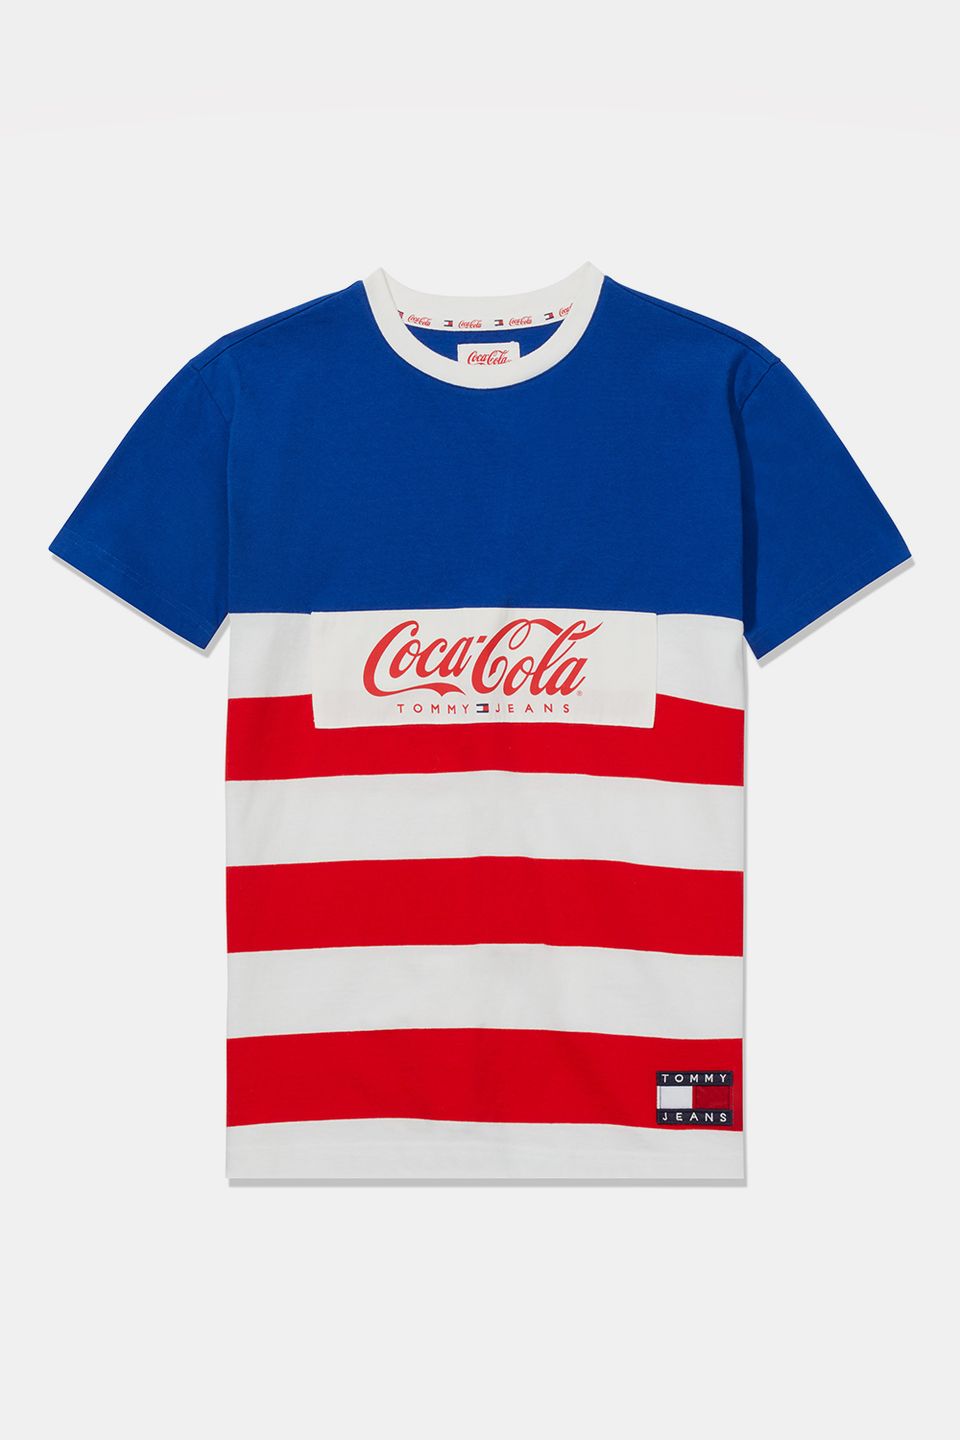 Tommy Jeans x Coca-Cola SS19 Collection: Shop Here